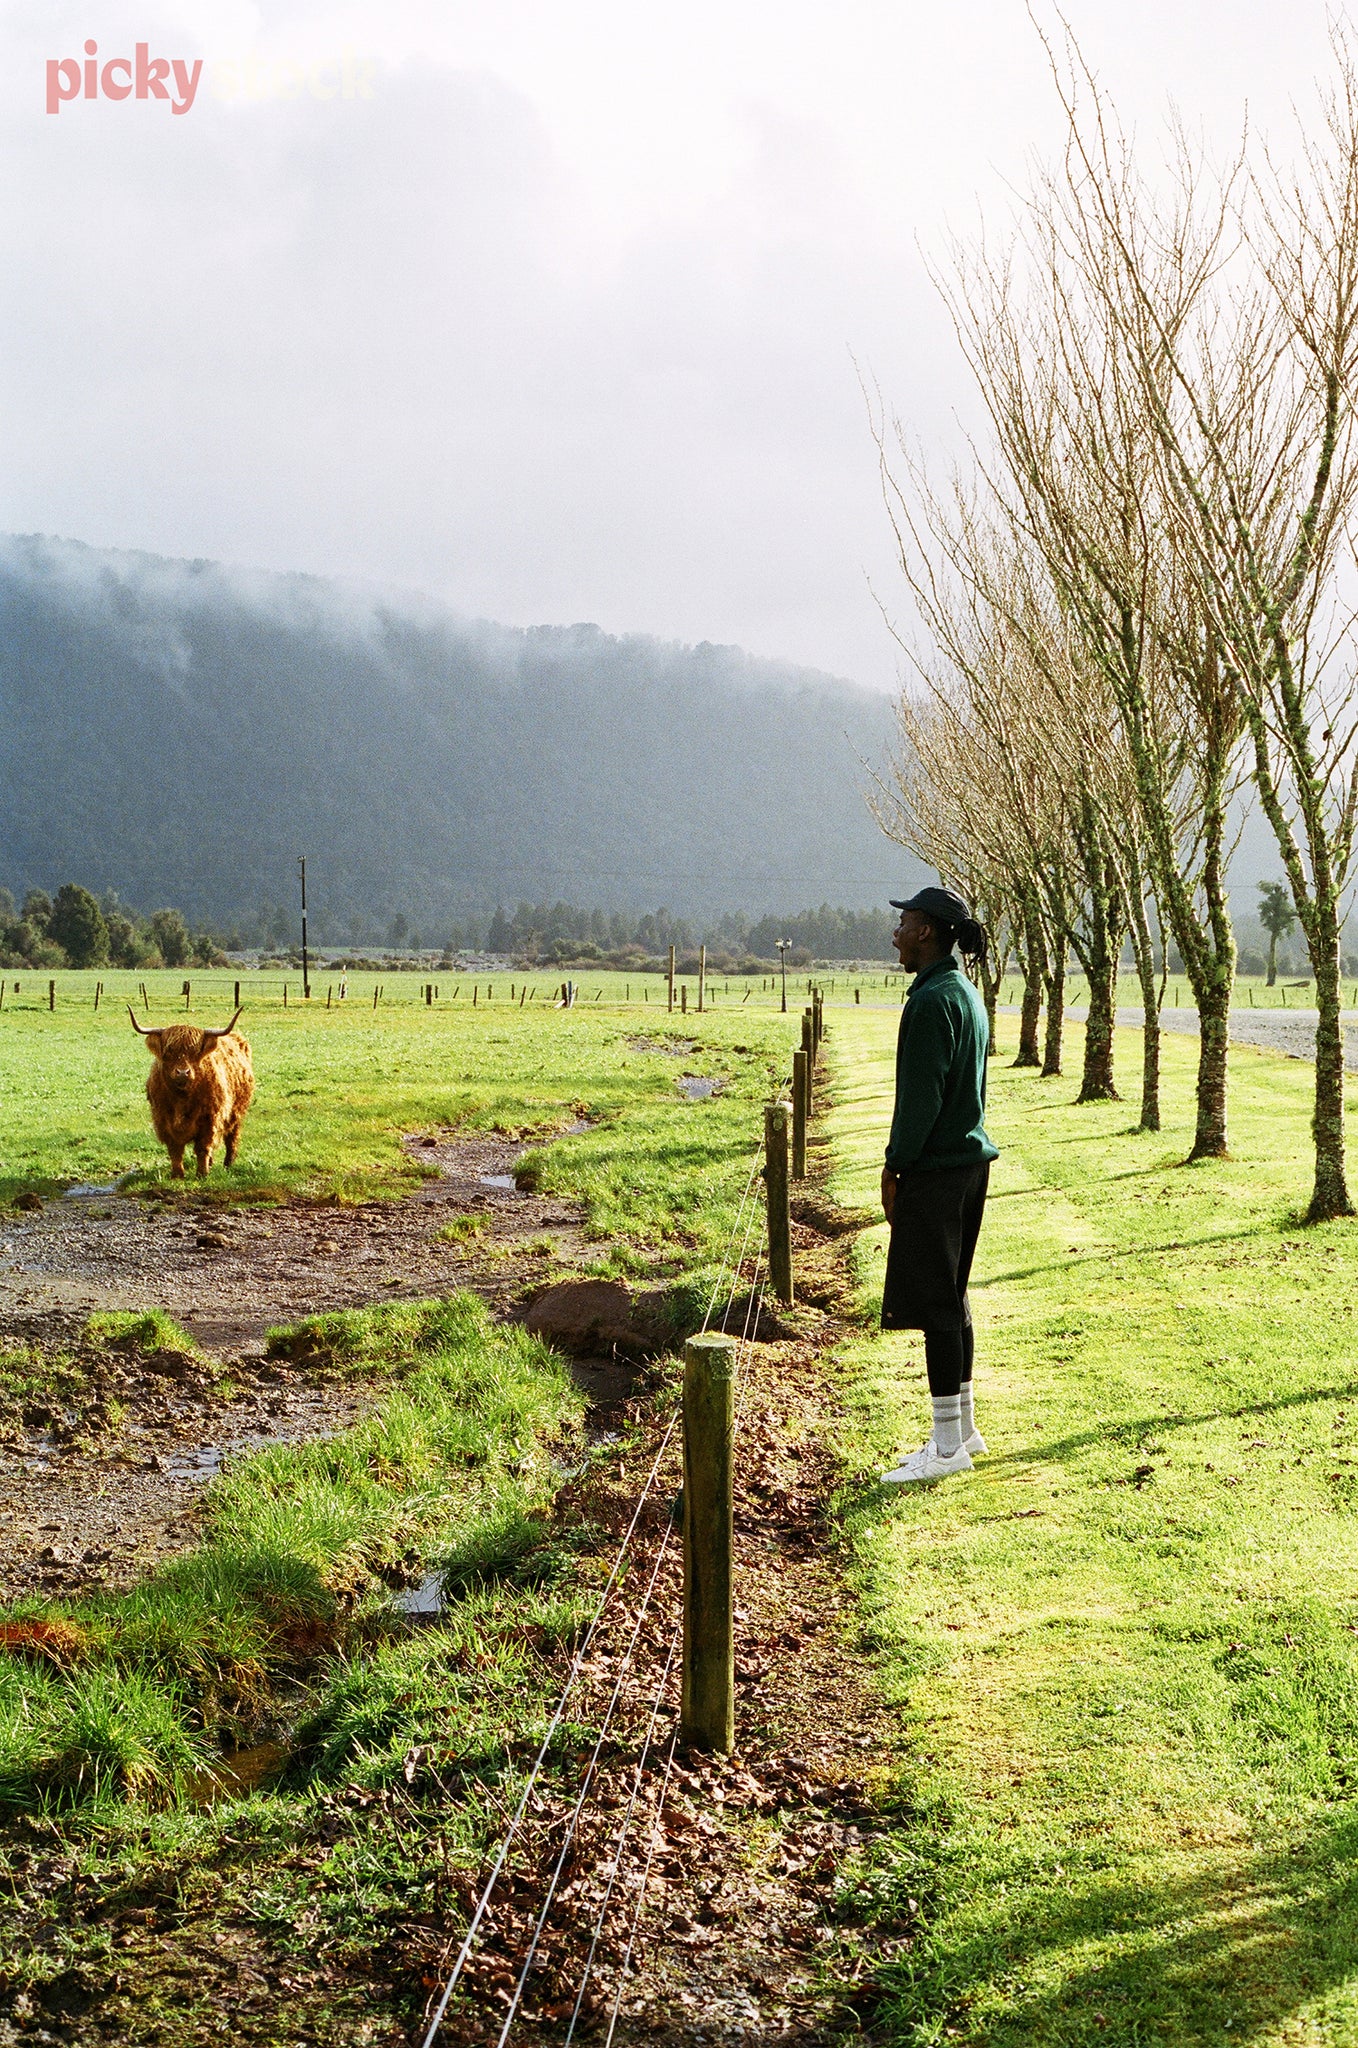 A young man stands overlooking a farm, at a stag in the paddock.